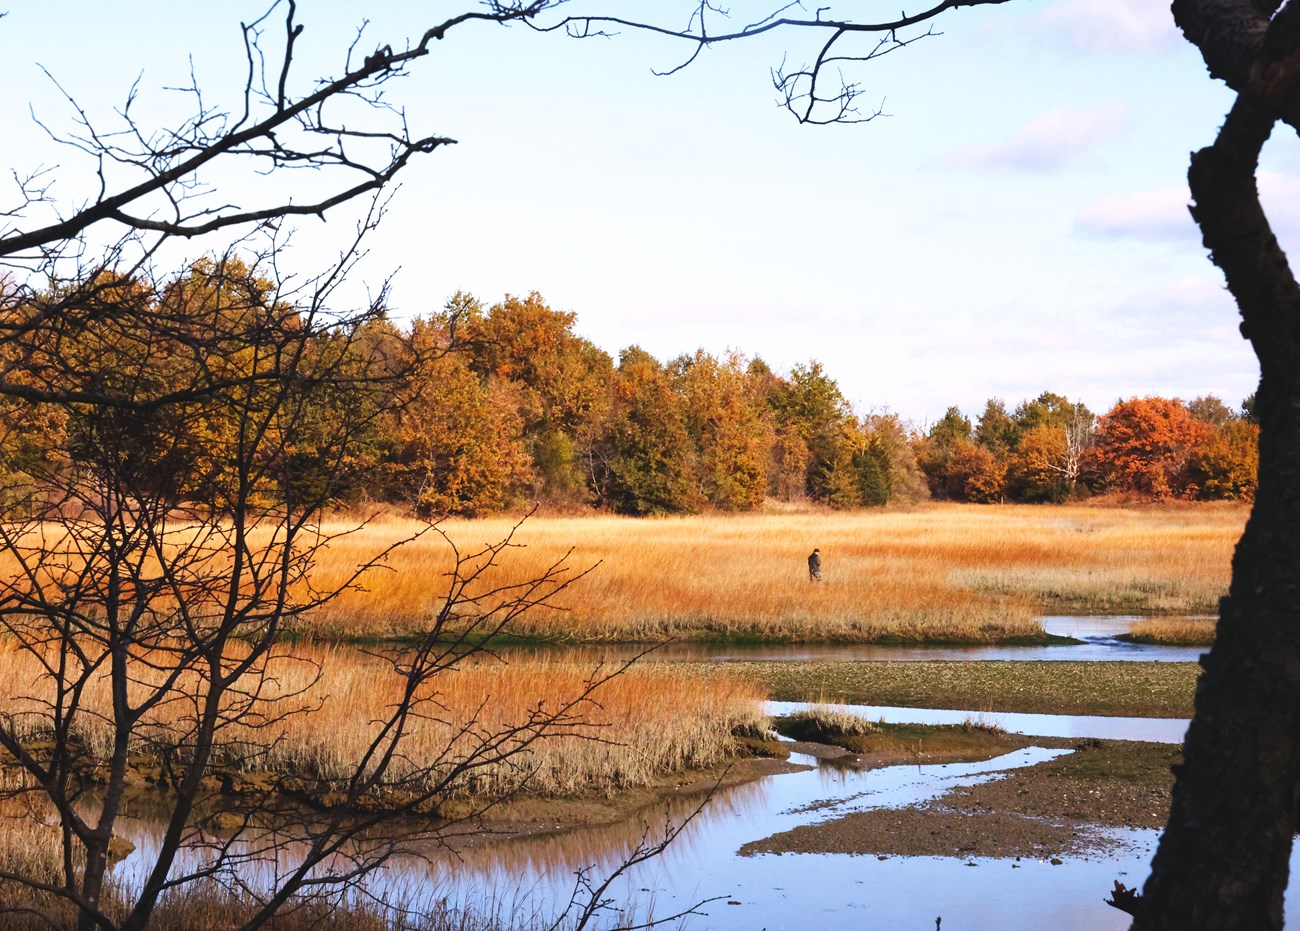 Fields of marsh grass are fringed by channels of seawater and a young adult stands in the grass, waist high. Trees displaying fall foliage line the back end of the salt marsh.